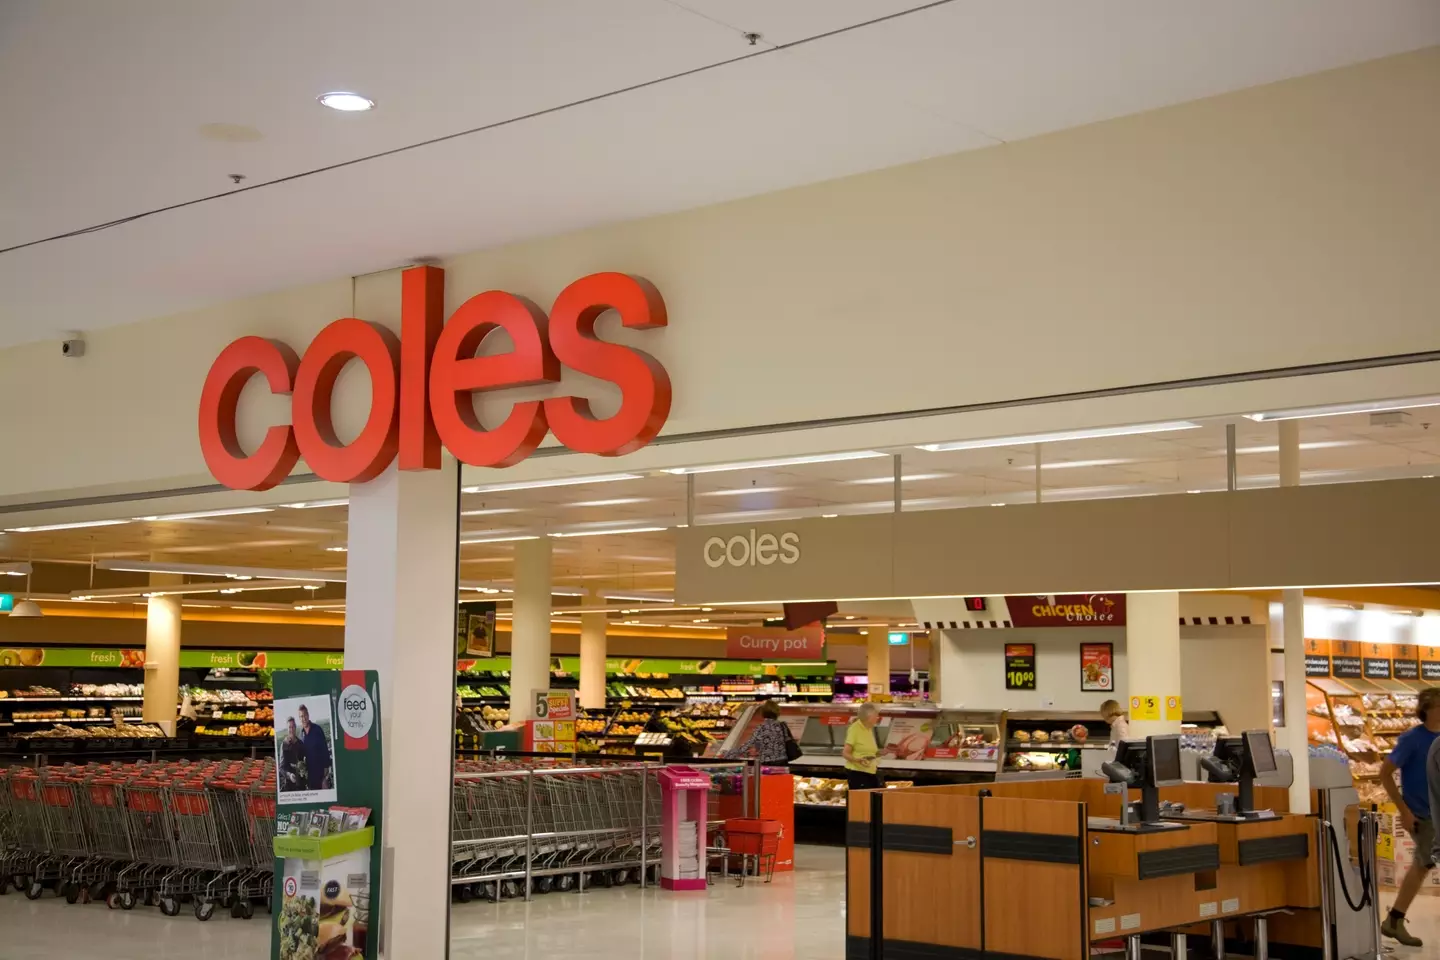 Coles are in the limelight for one of their Mother's Day displays.